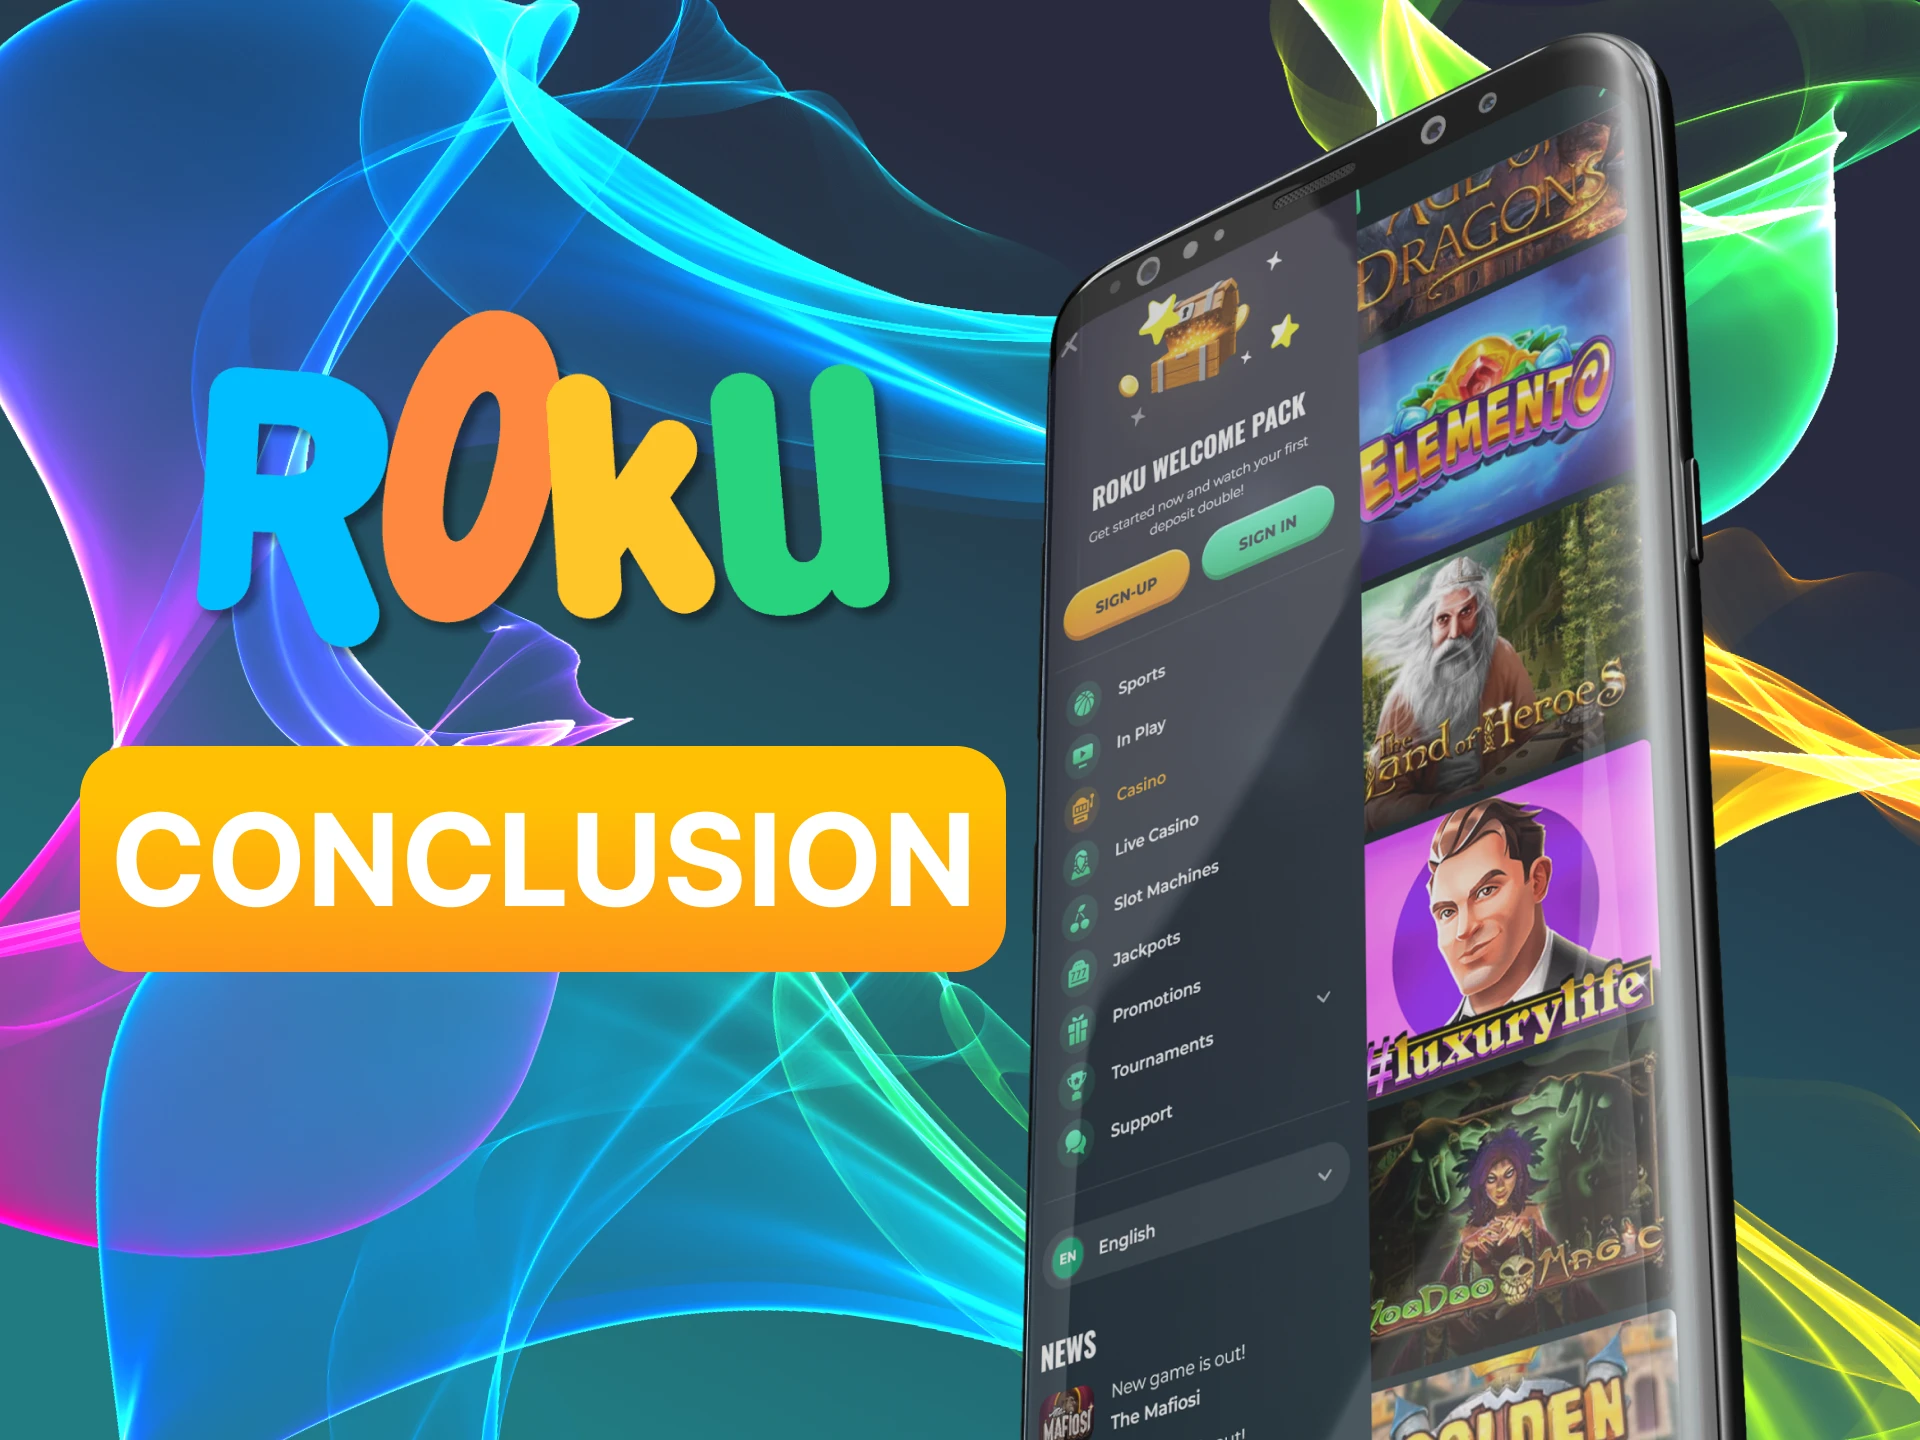 With the Rokubet app you have access to sports betting and casino games, and lots of bonuses.